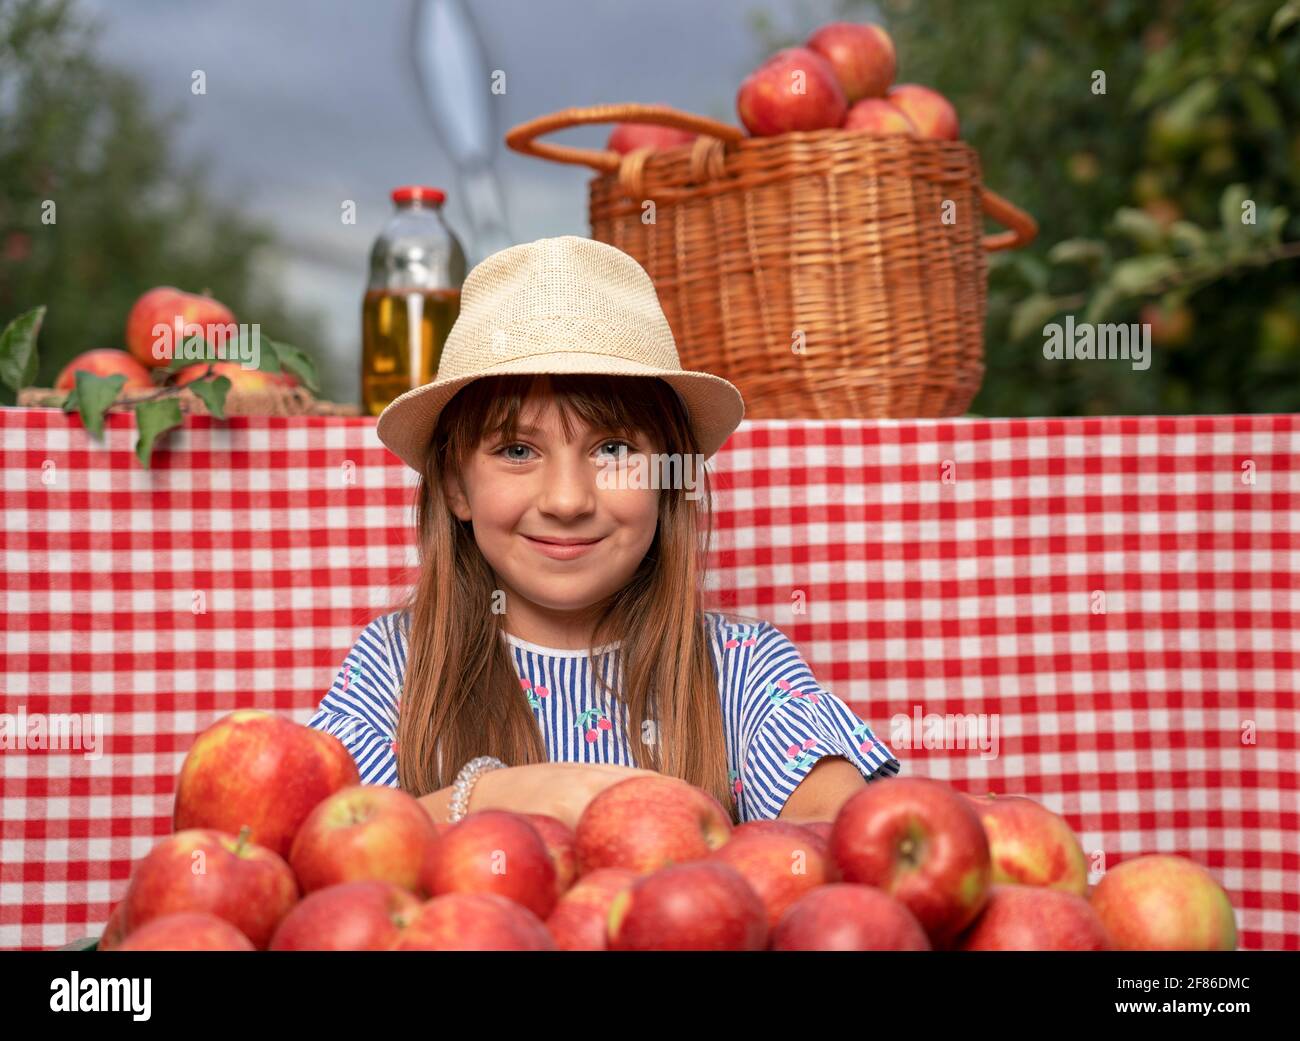 Portrait Of Smiling Little Girl With Beautiful Eyes in an Orchard. Healthy Food Concept. Cute Girl and Autumn Arrangement with Apples and Apple Juice. Stock Photo